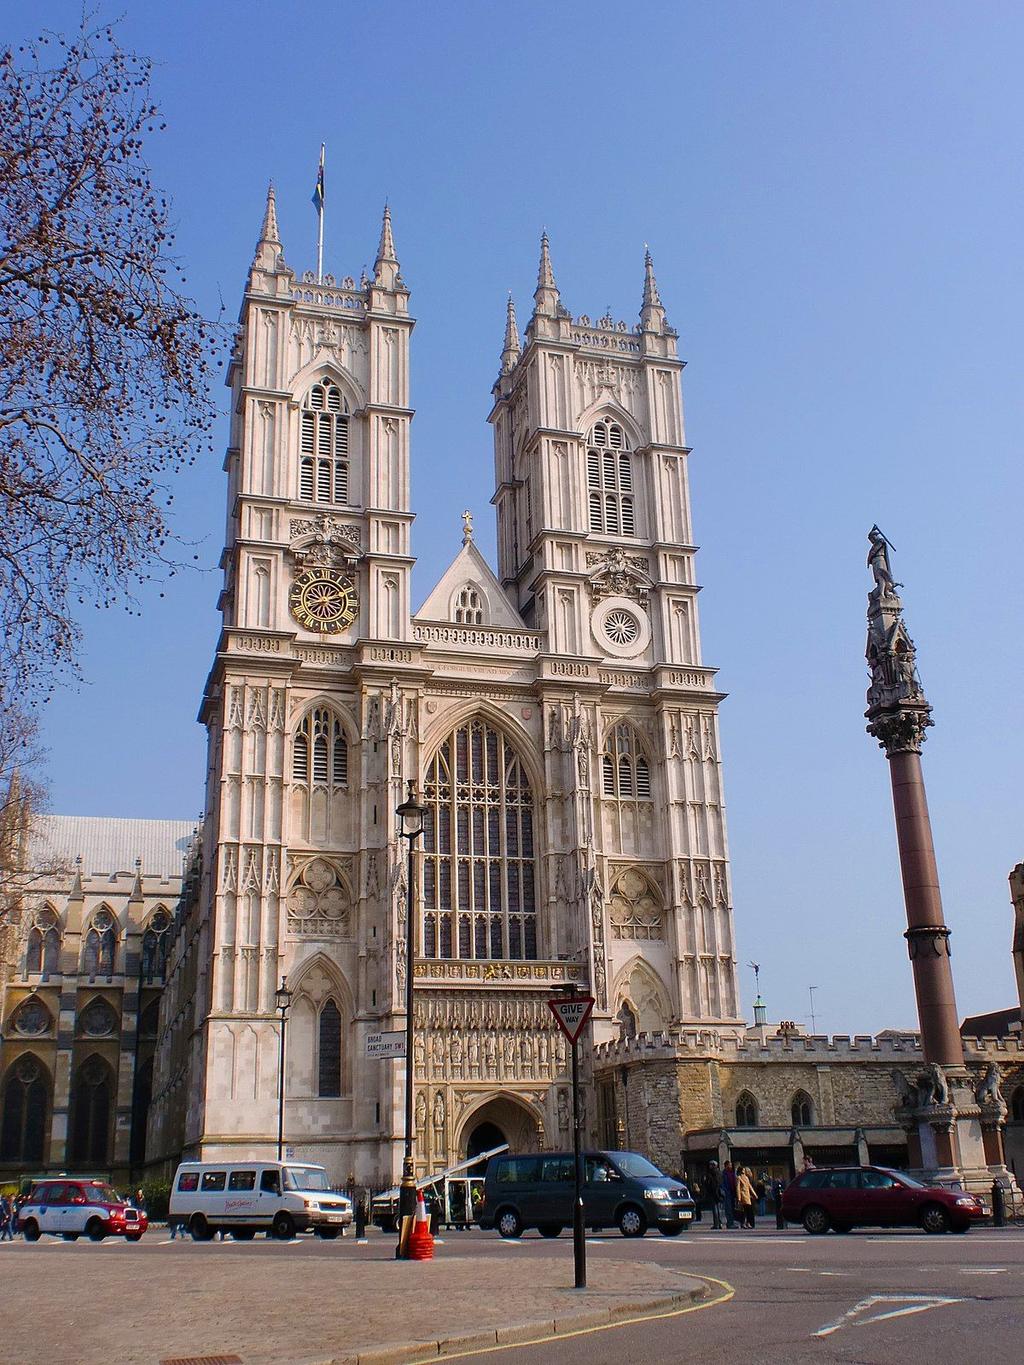 Westminster Abbey Westminster Abbey is a large,mainly Gothic abbey church in the City of Westminster, London, England.